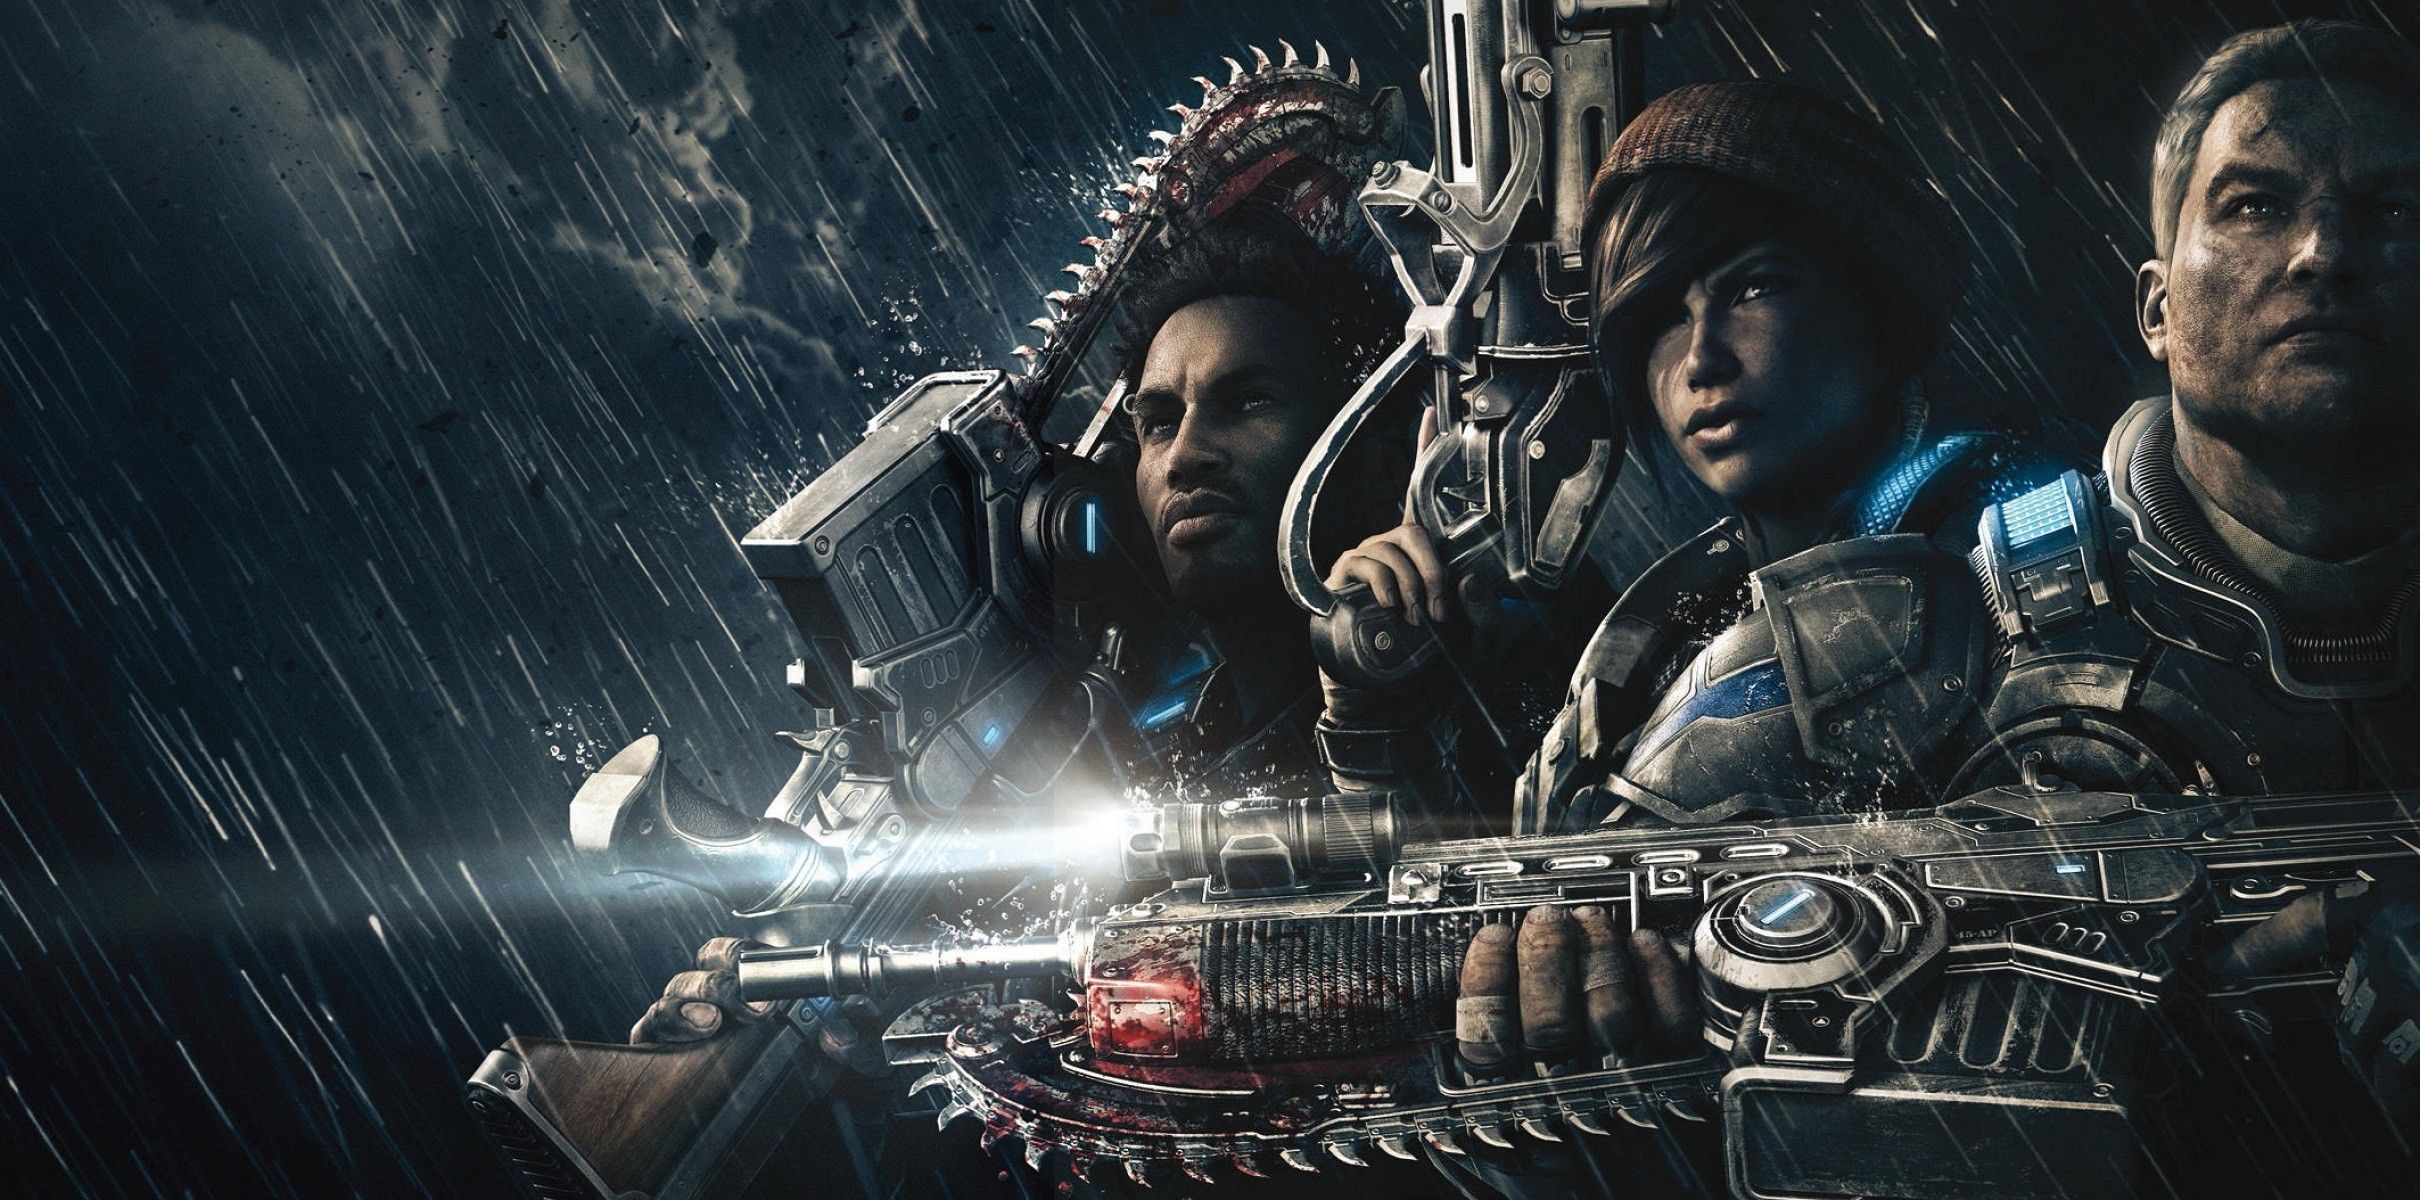 Gears of War 4 Wallpaper background picture